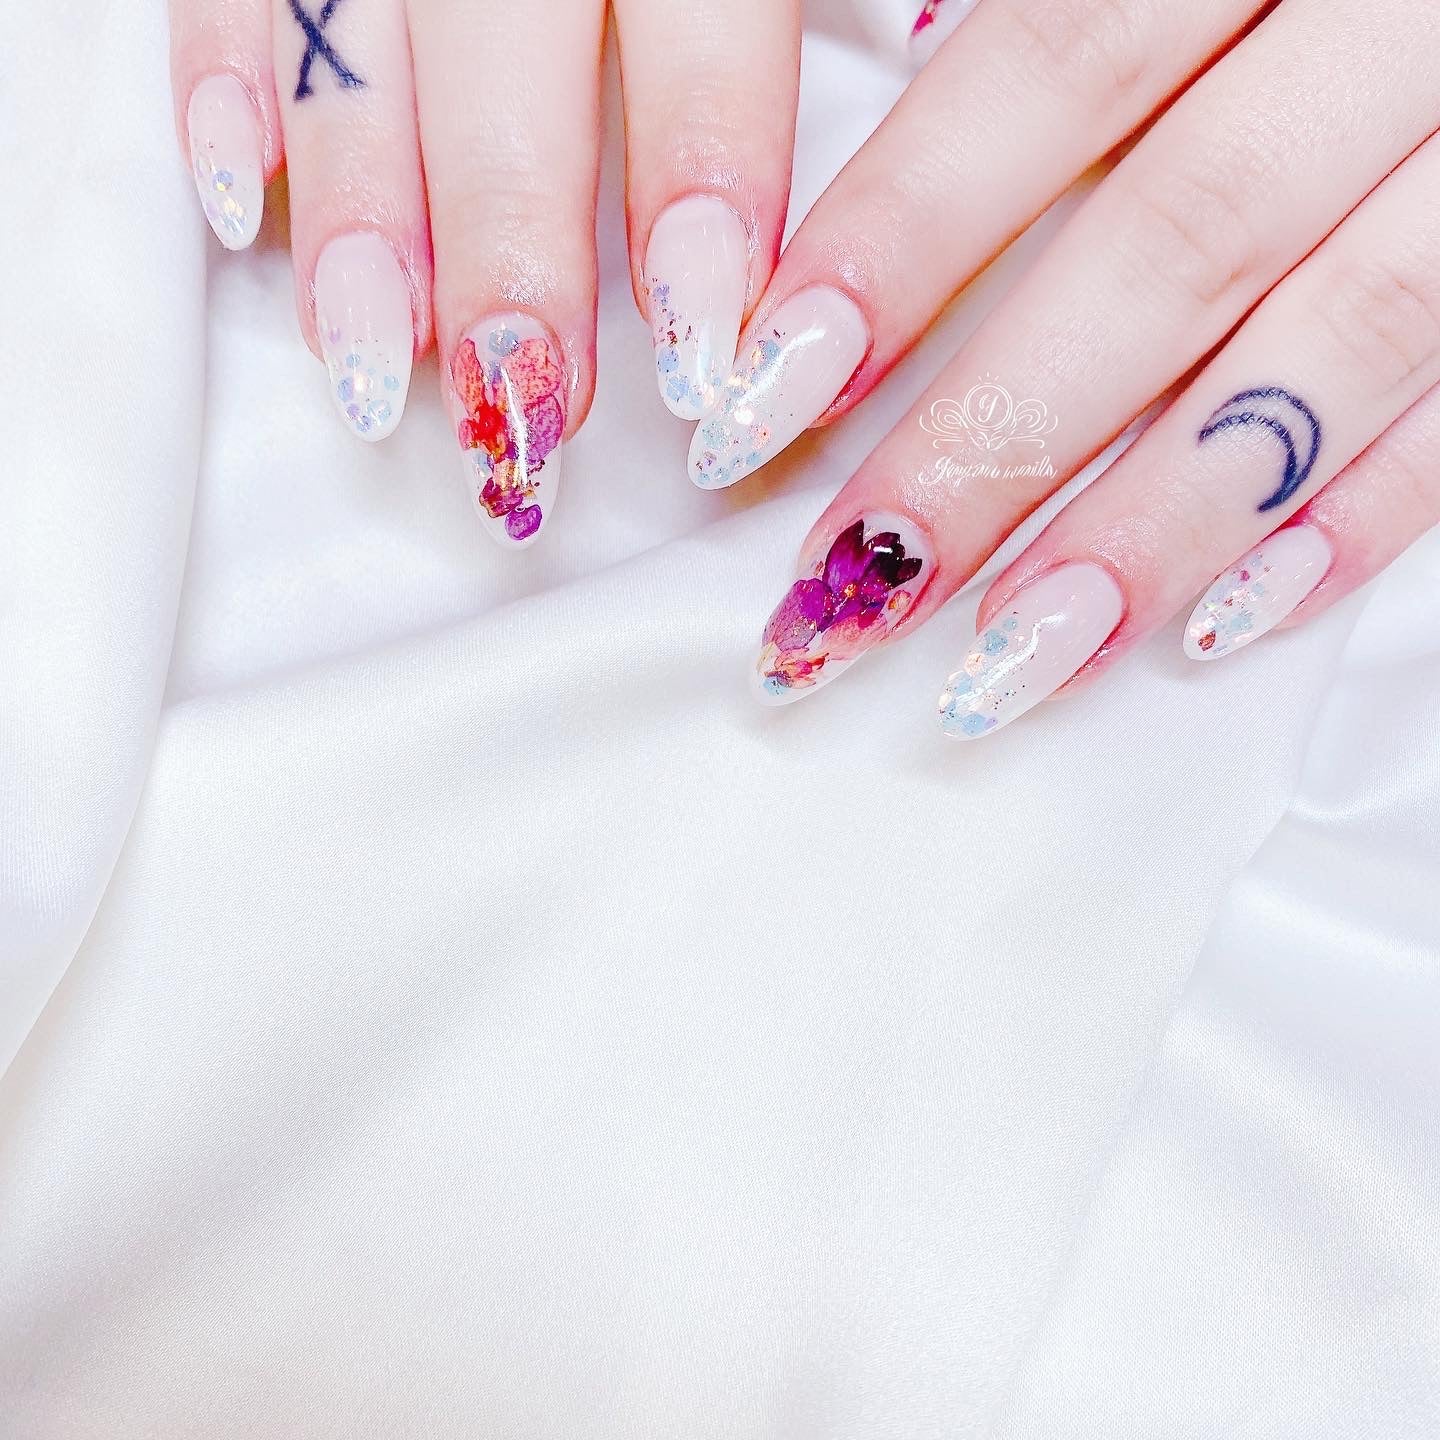 Japanese gel design with dry flowers